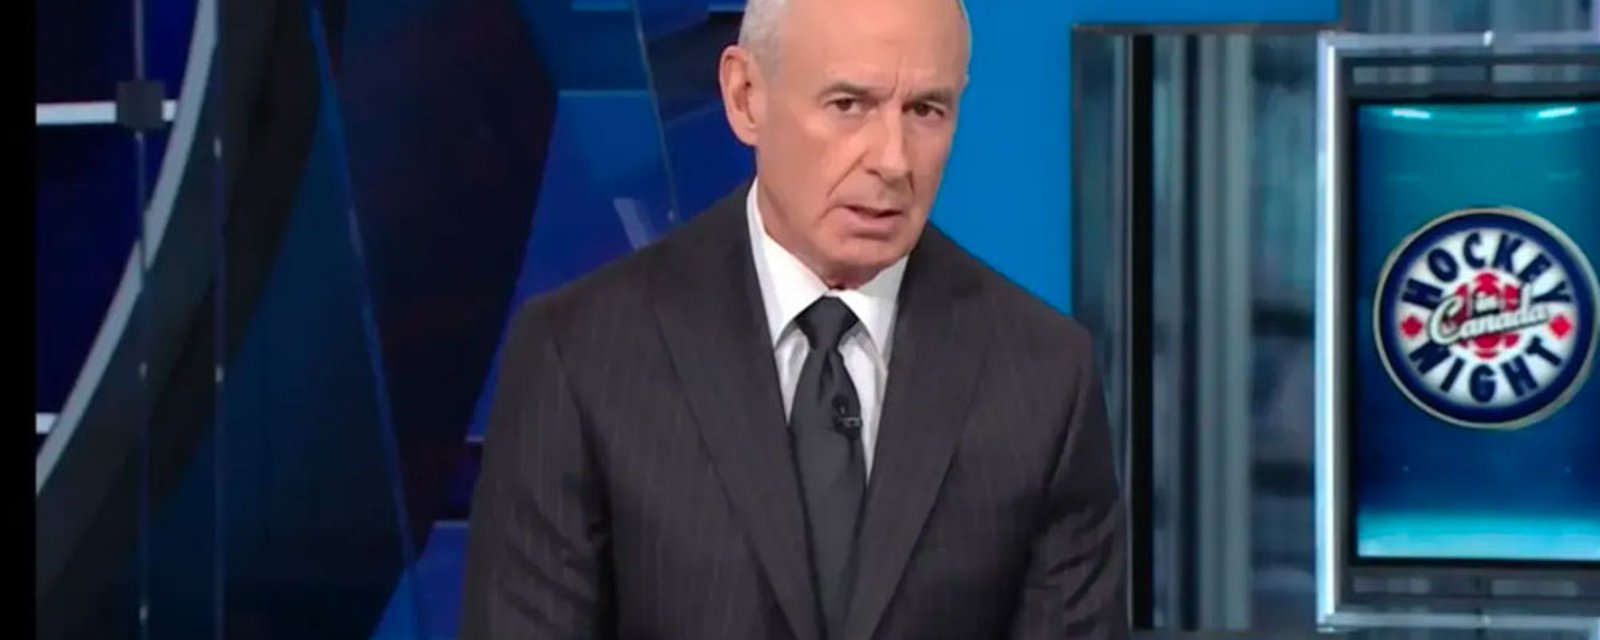 Ron MacLean finally breaks his silence on rumored firing from CBC and Sportsnet